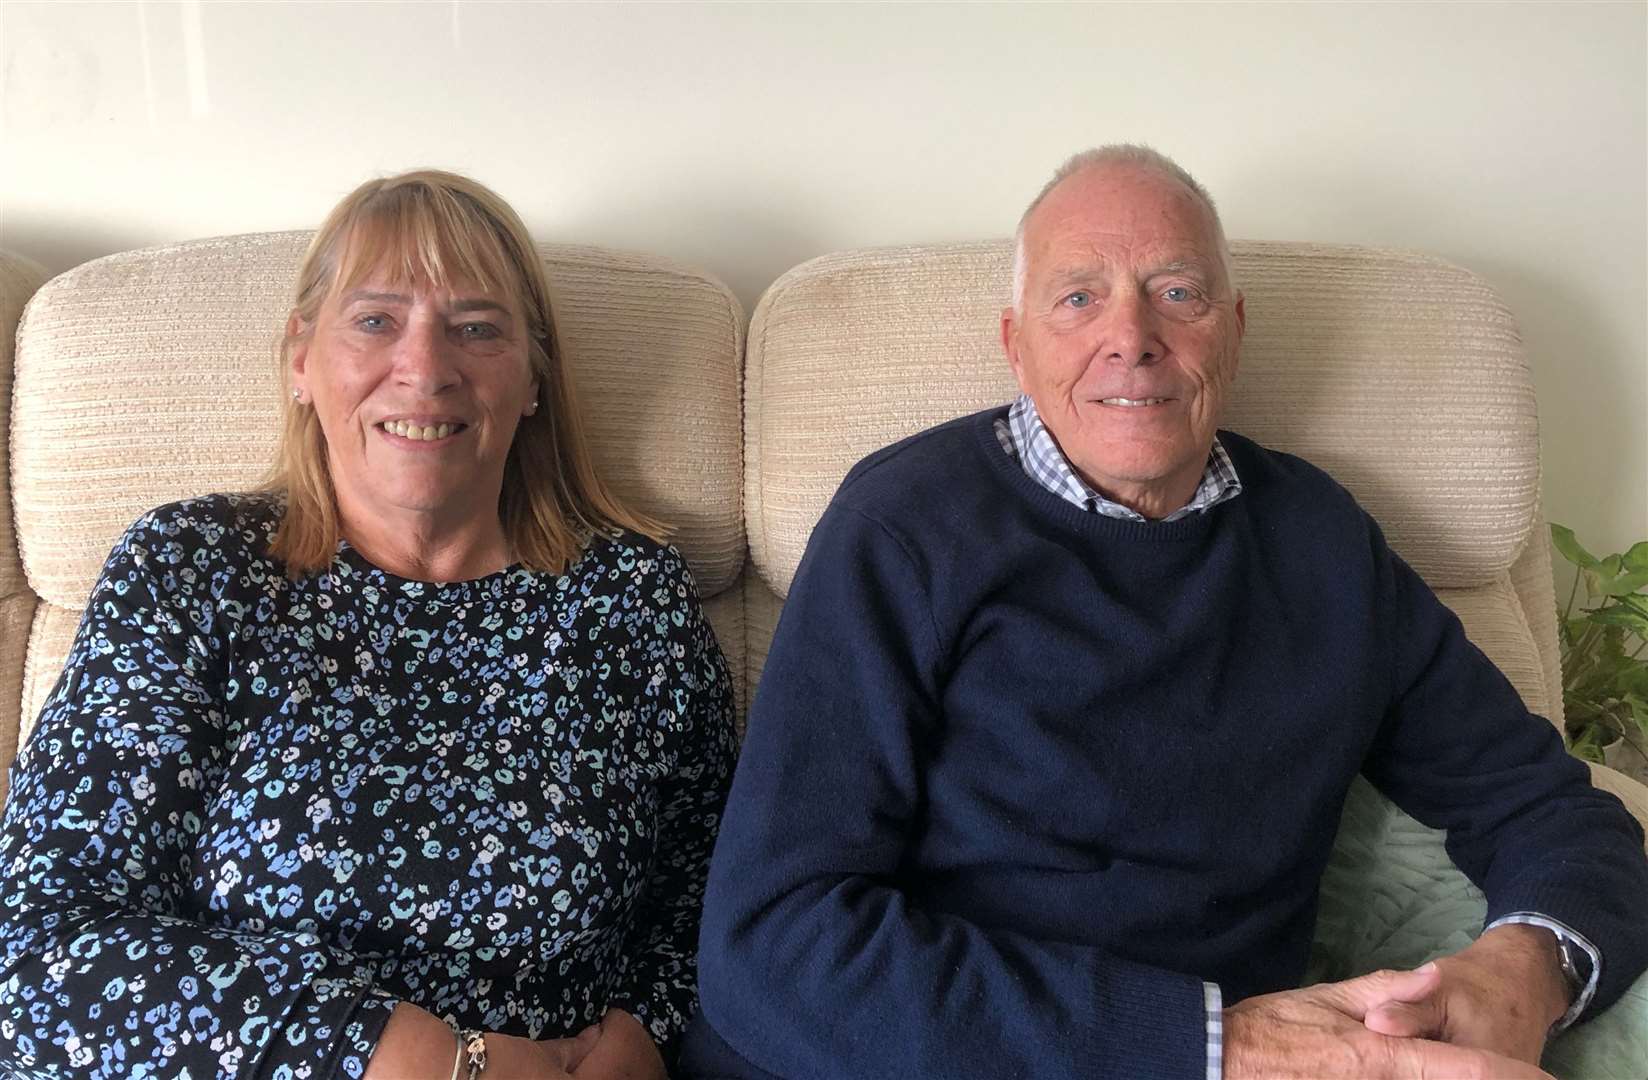 Norman and Carole Garrud enjoy living next to an Airbnb in South Road, Hythe, one of the district's second home hotspots